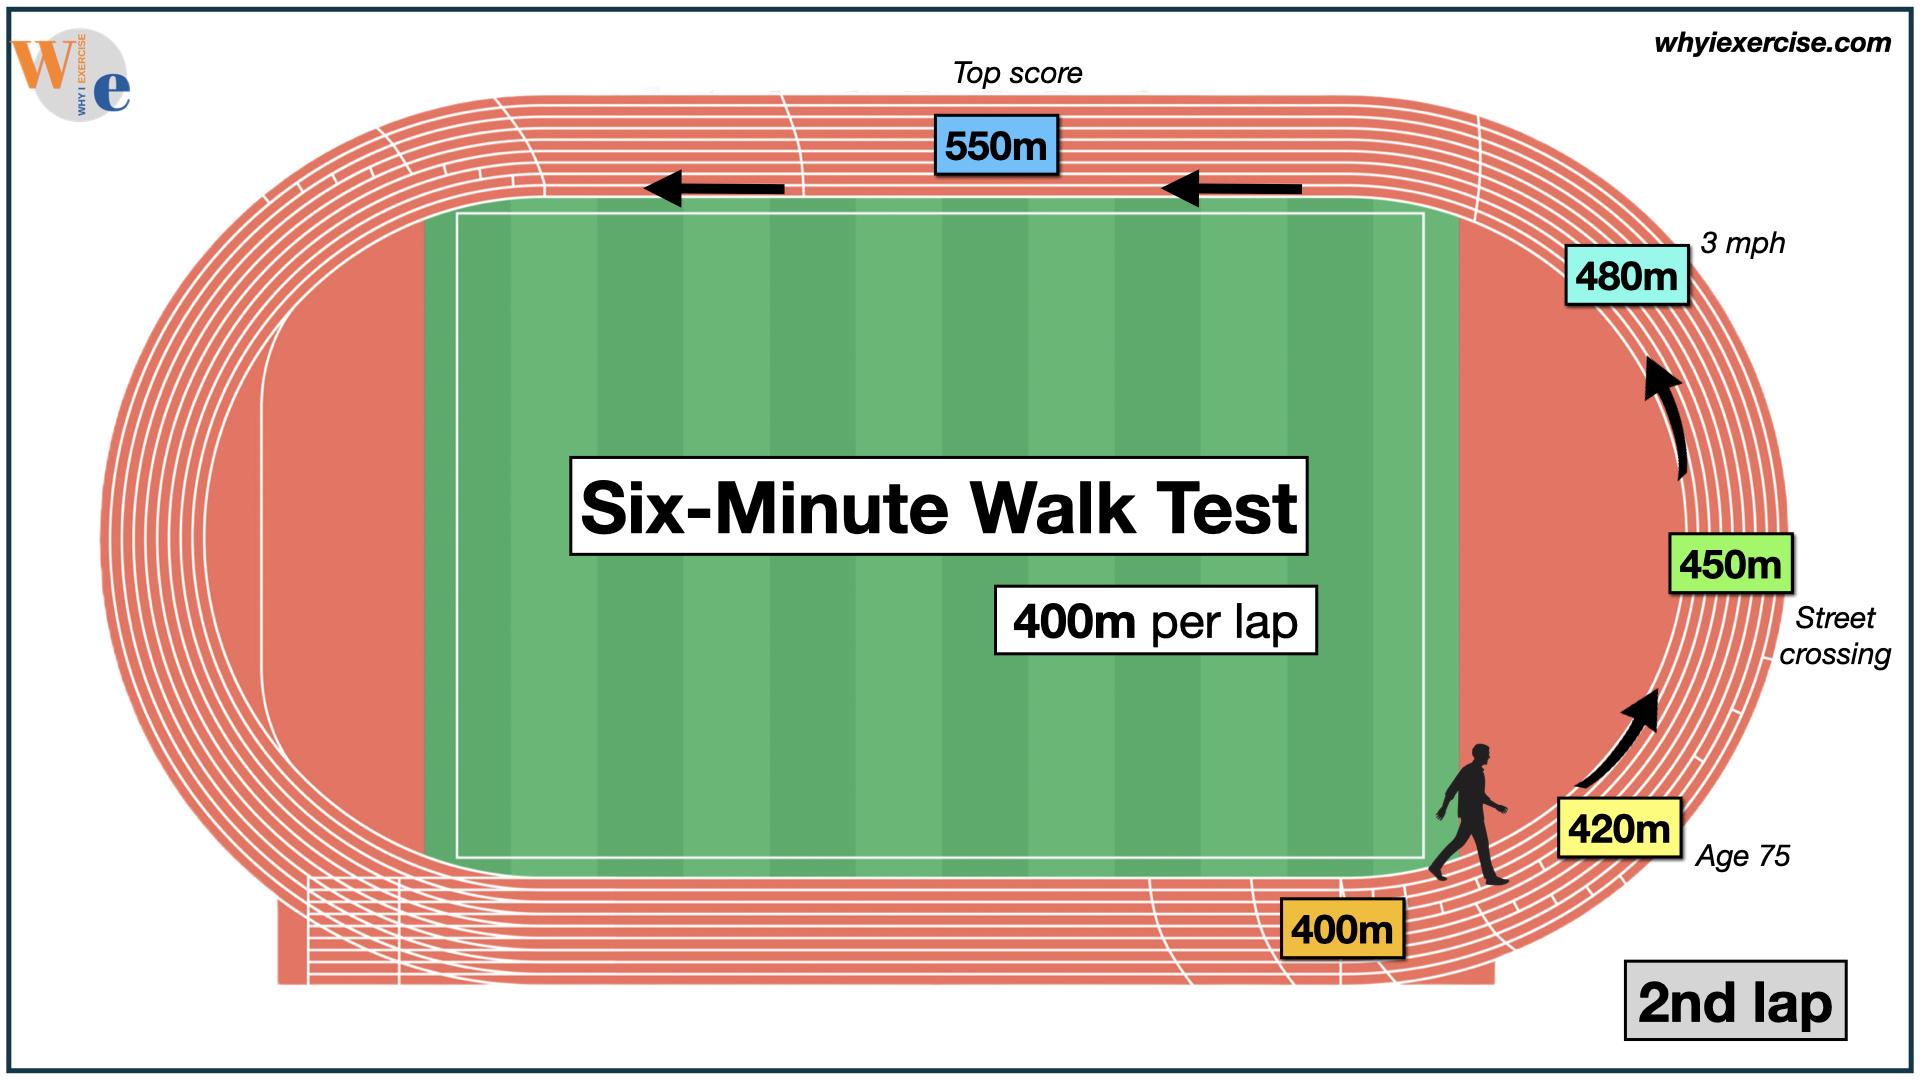 Compare your score to peers with the six minute walk test